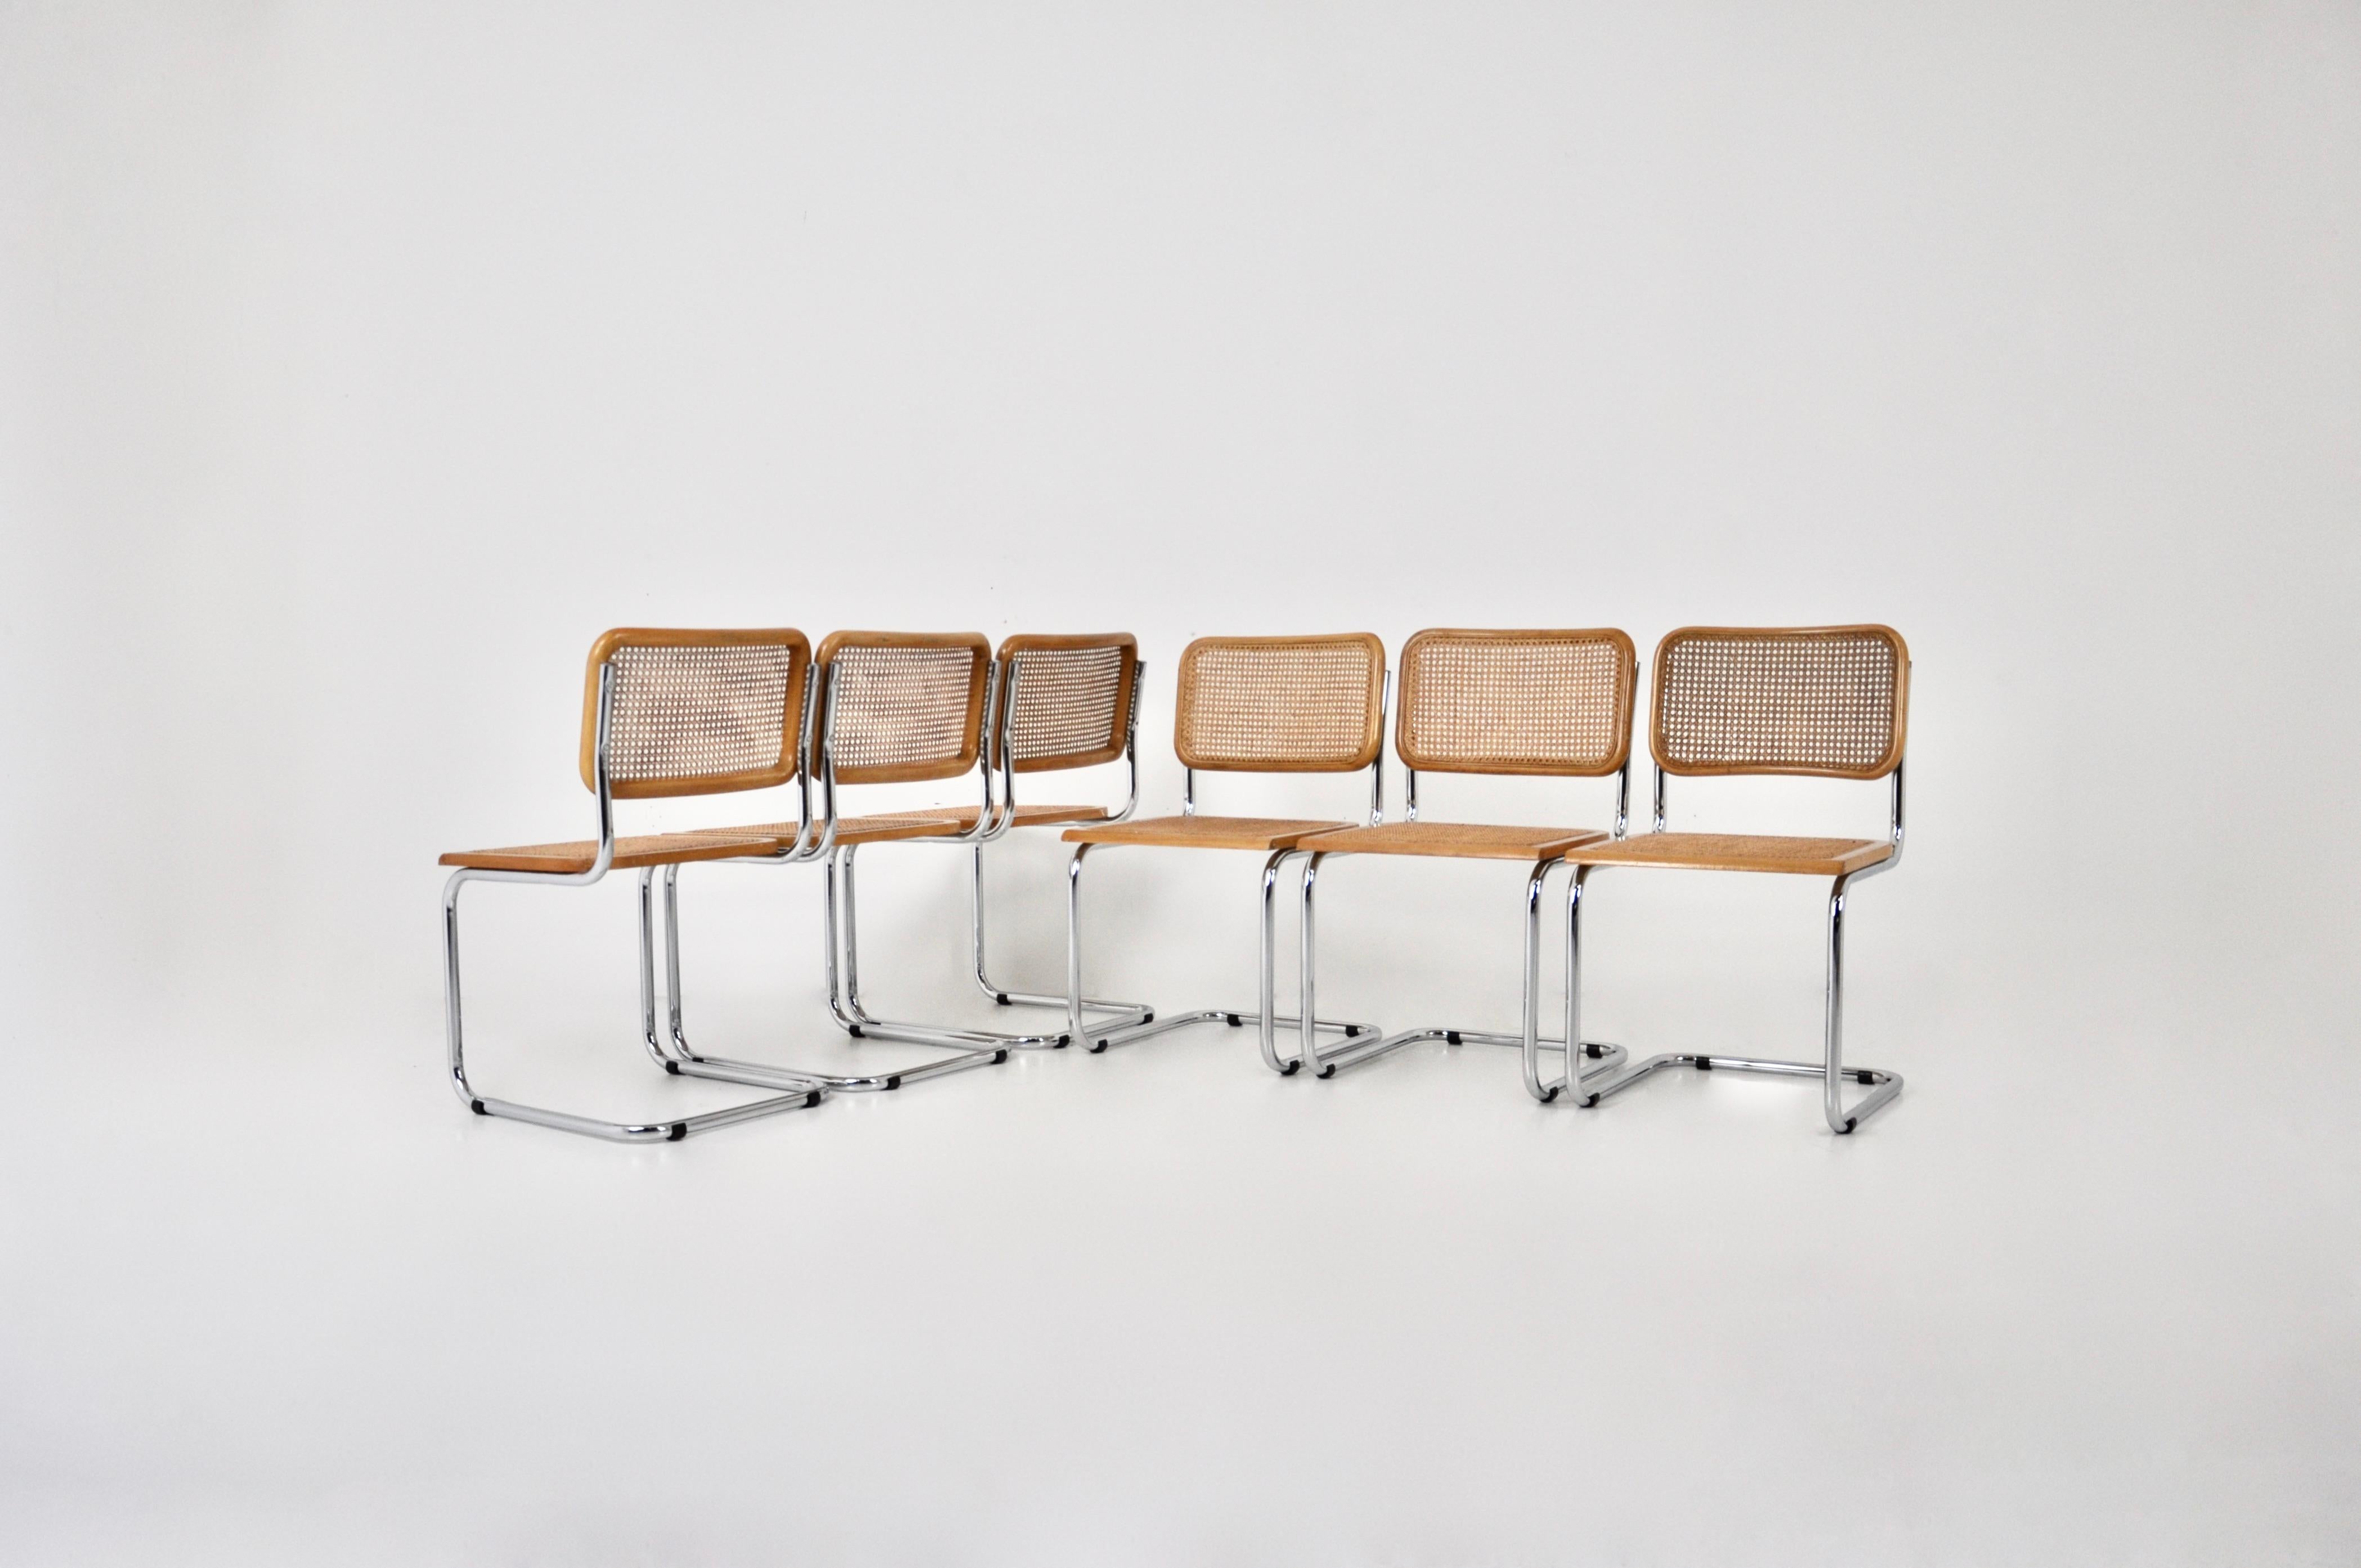 Set of 6 chairs in metal, wood and rattan. Dimensions: seat height: 45 cm. Wear due to time and age of the chairs. Sold by 6, the set cannot be divided.